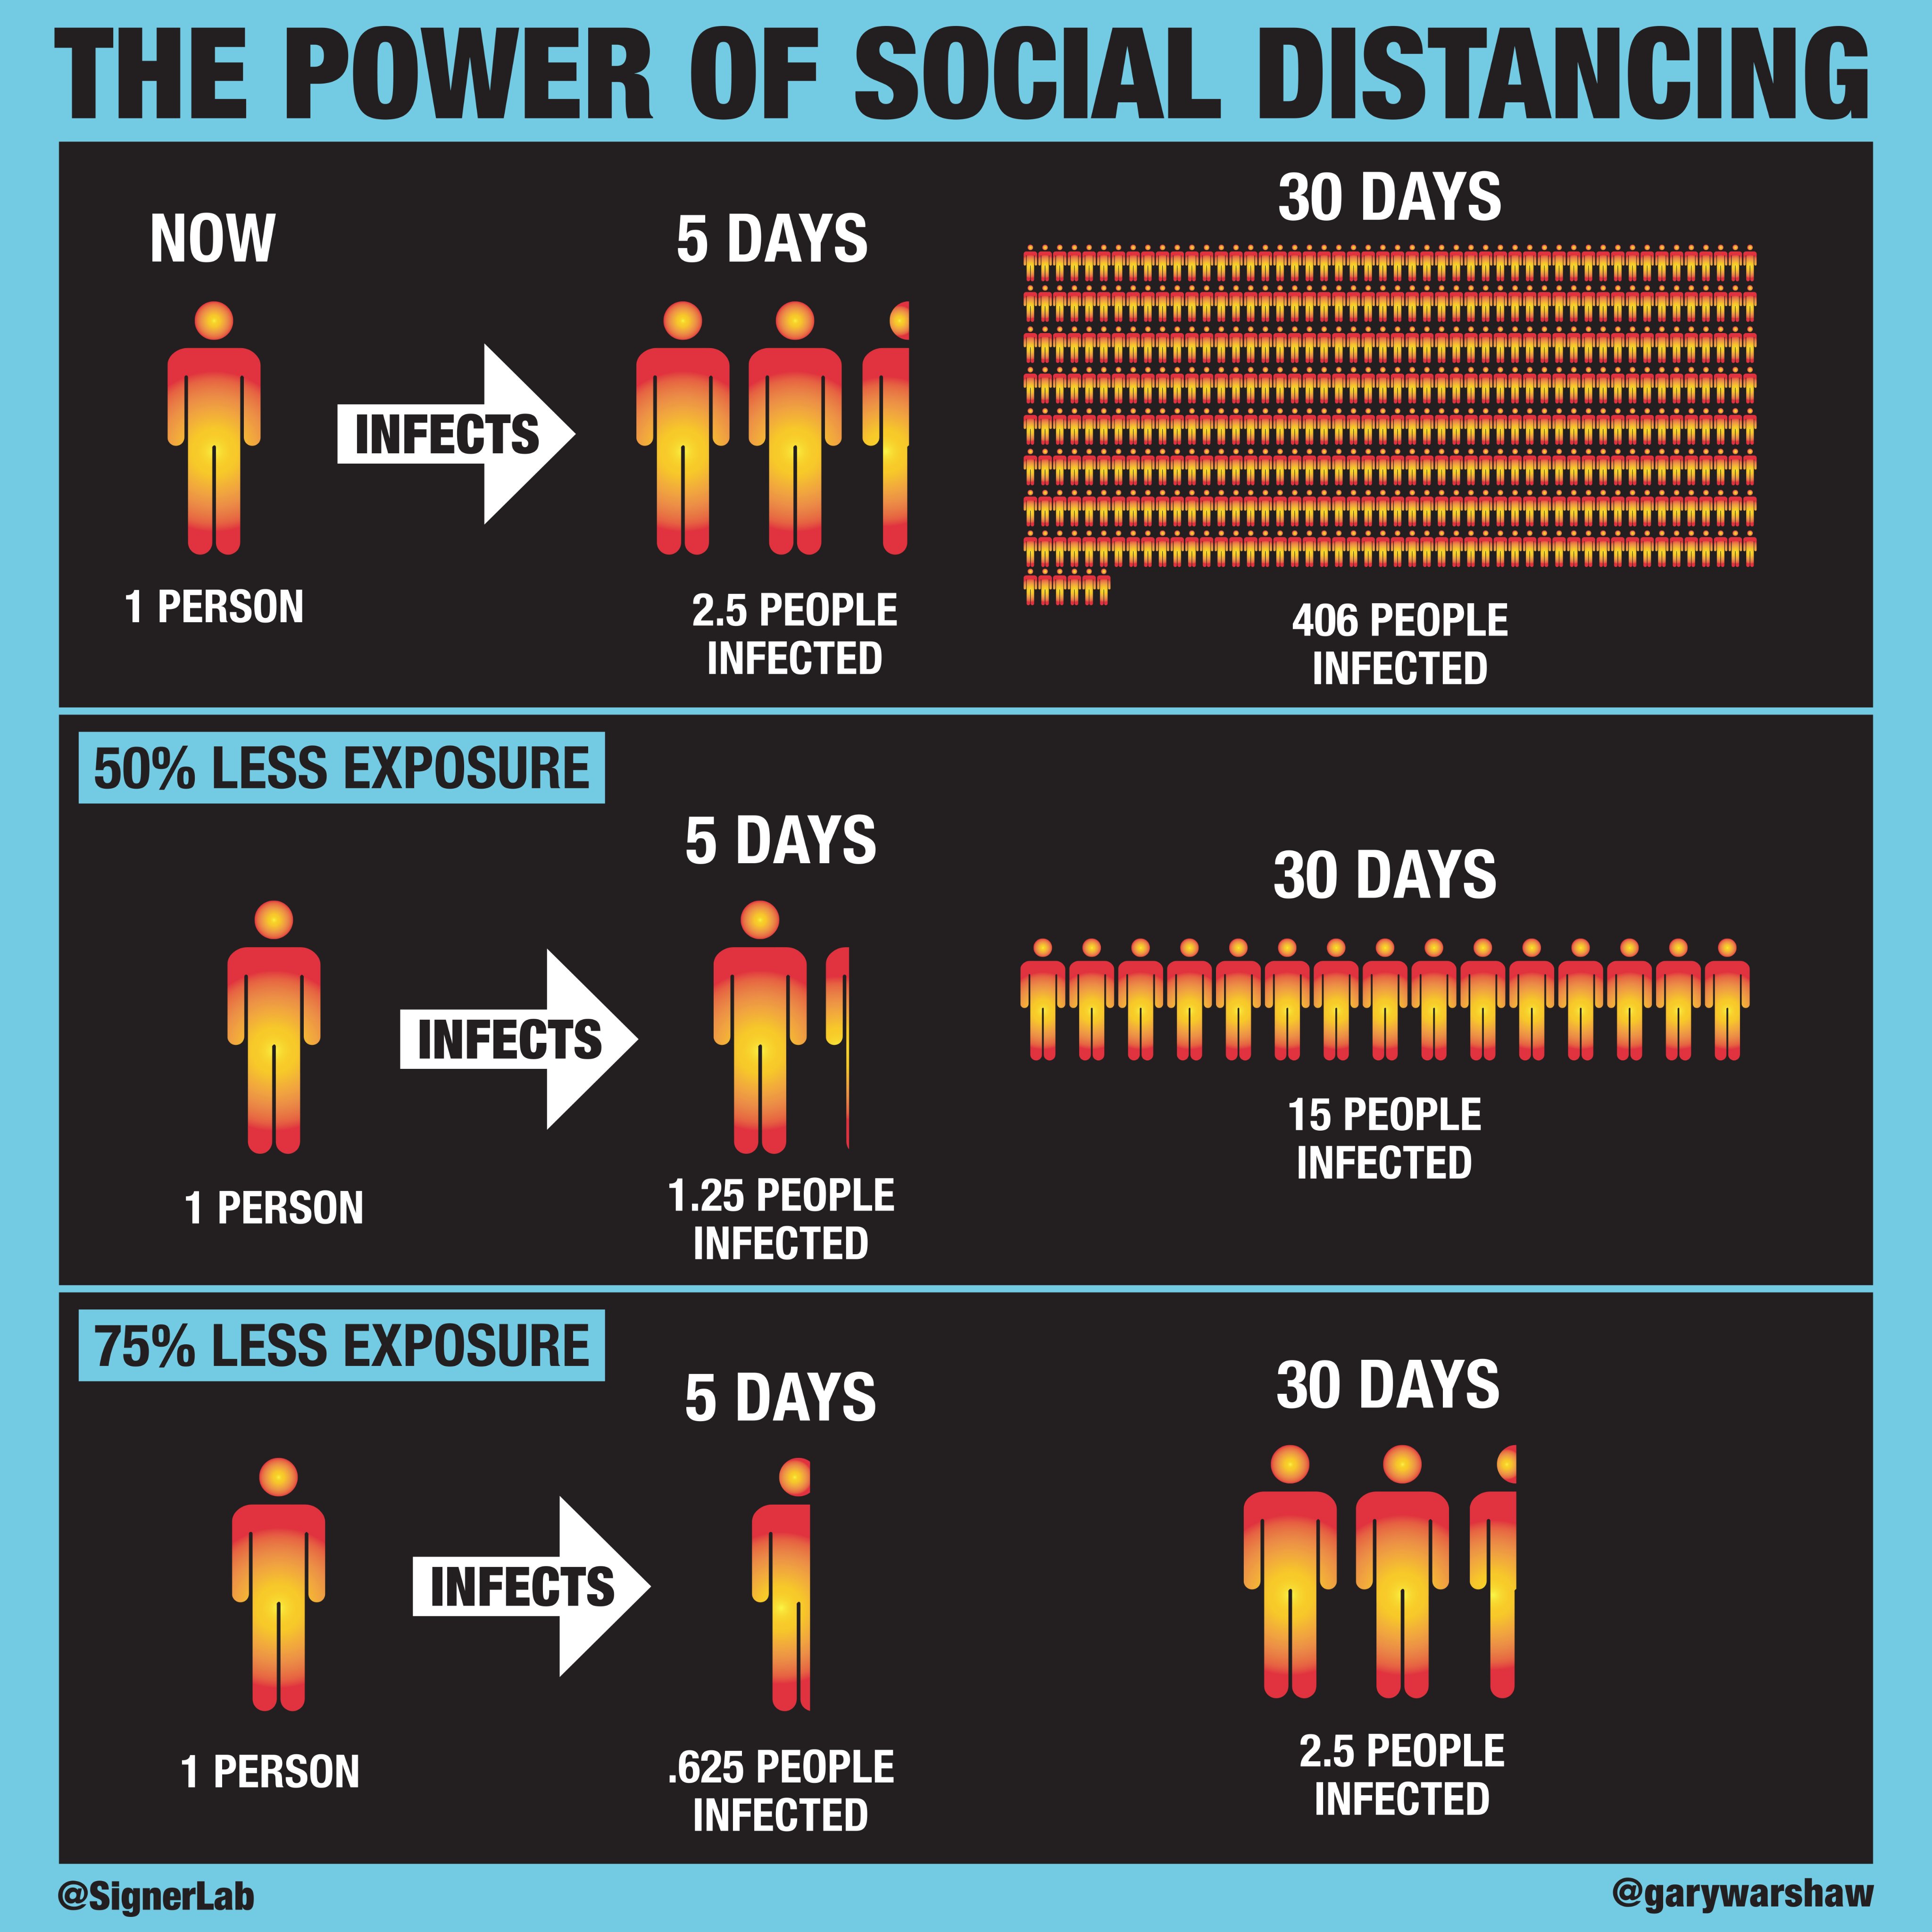 The power of social distancing. Image credit: Gary Warshaw